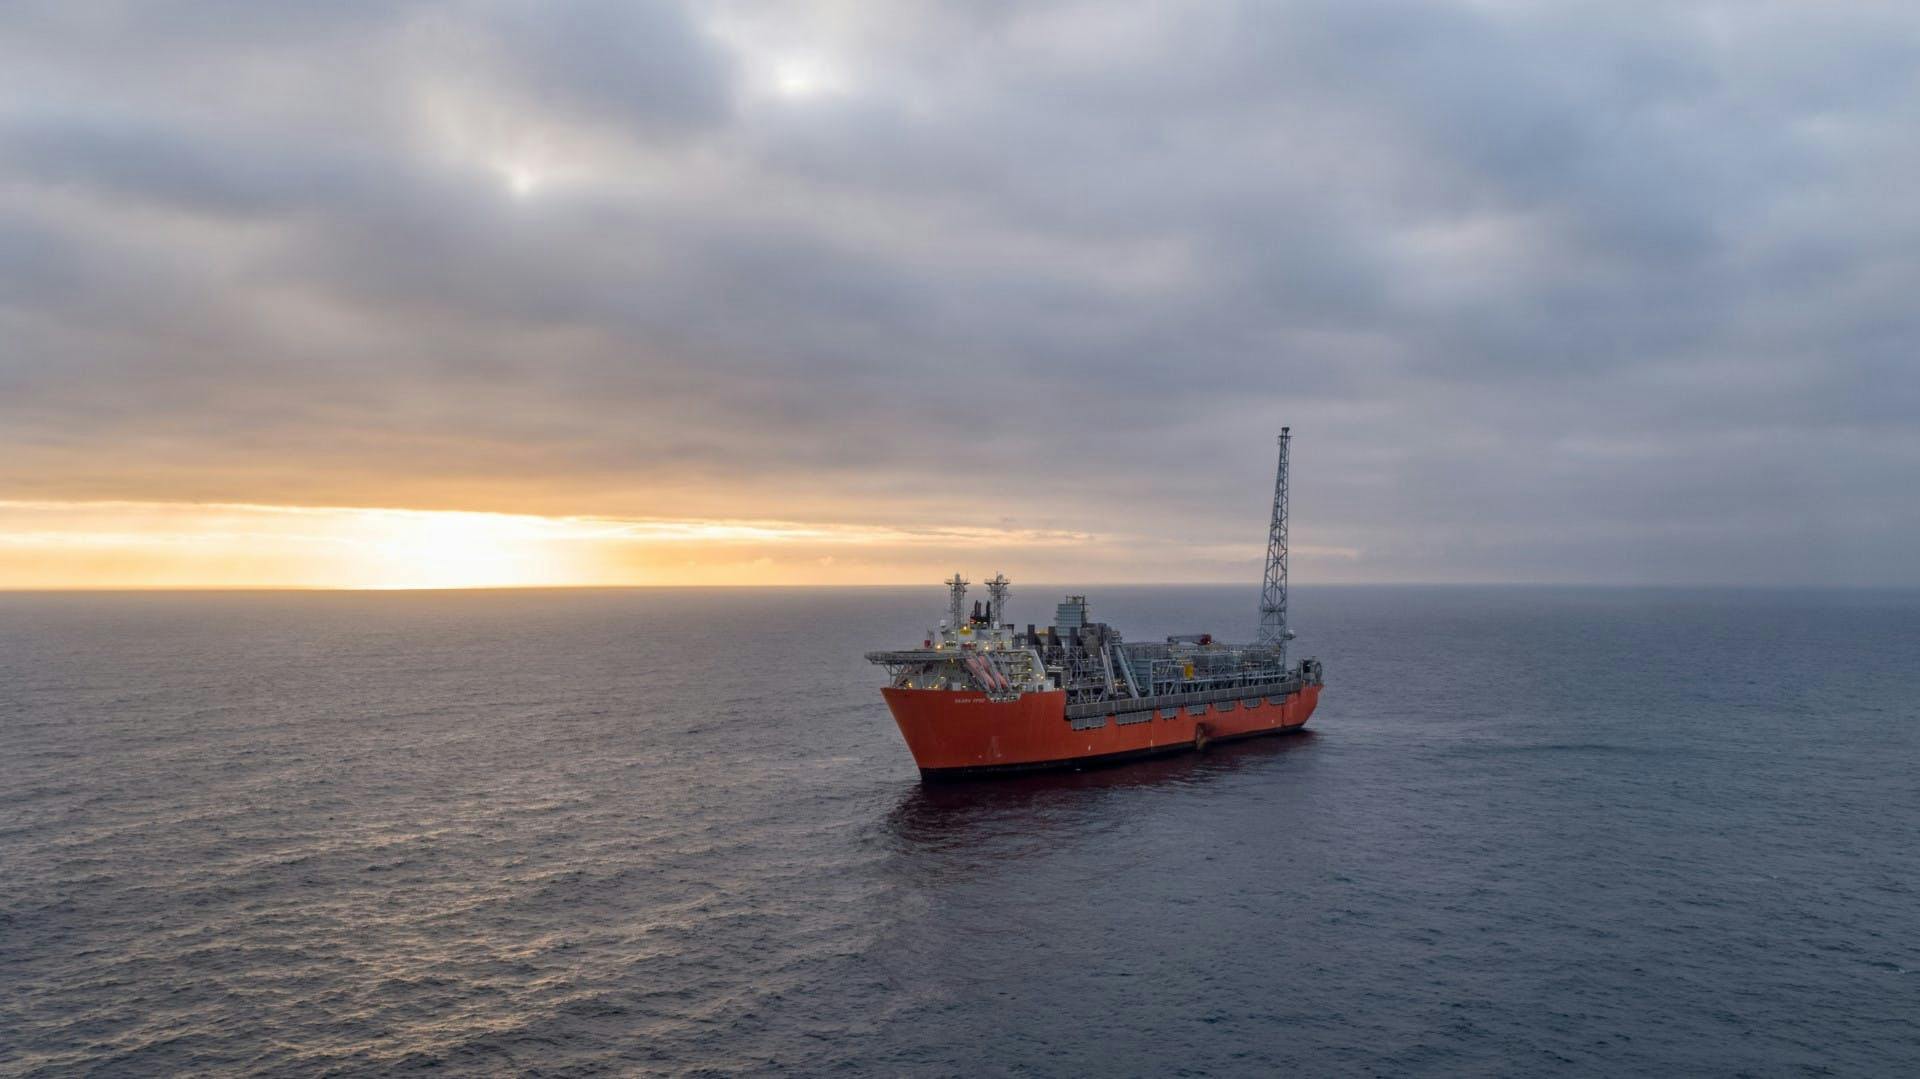 Skarv is a field in the northern part of the Norwegian Sea. The field has been developed with an FPSO, and Aker BP says it has one of the world&rsquo;s largest offshore gas processing plants on this type of facility.